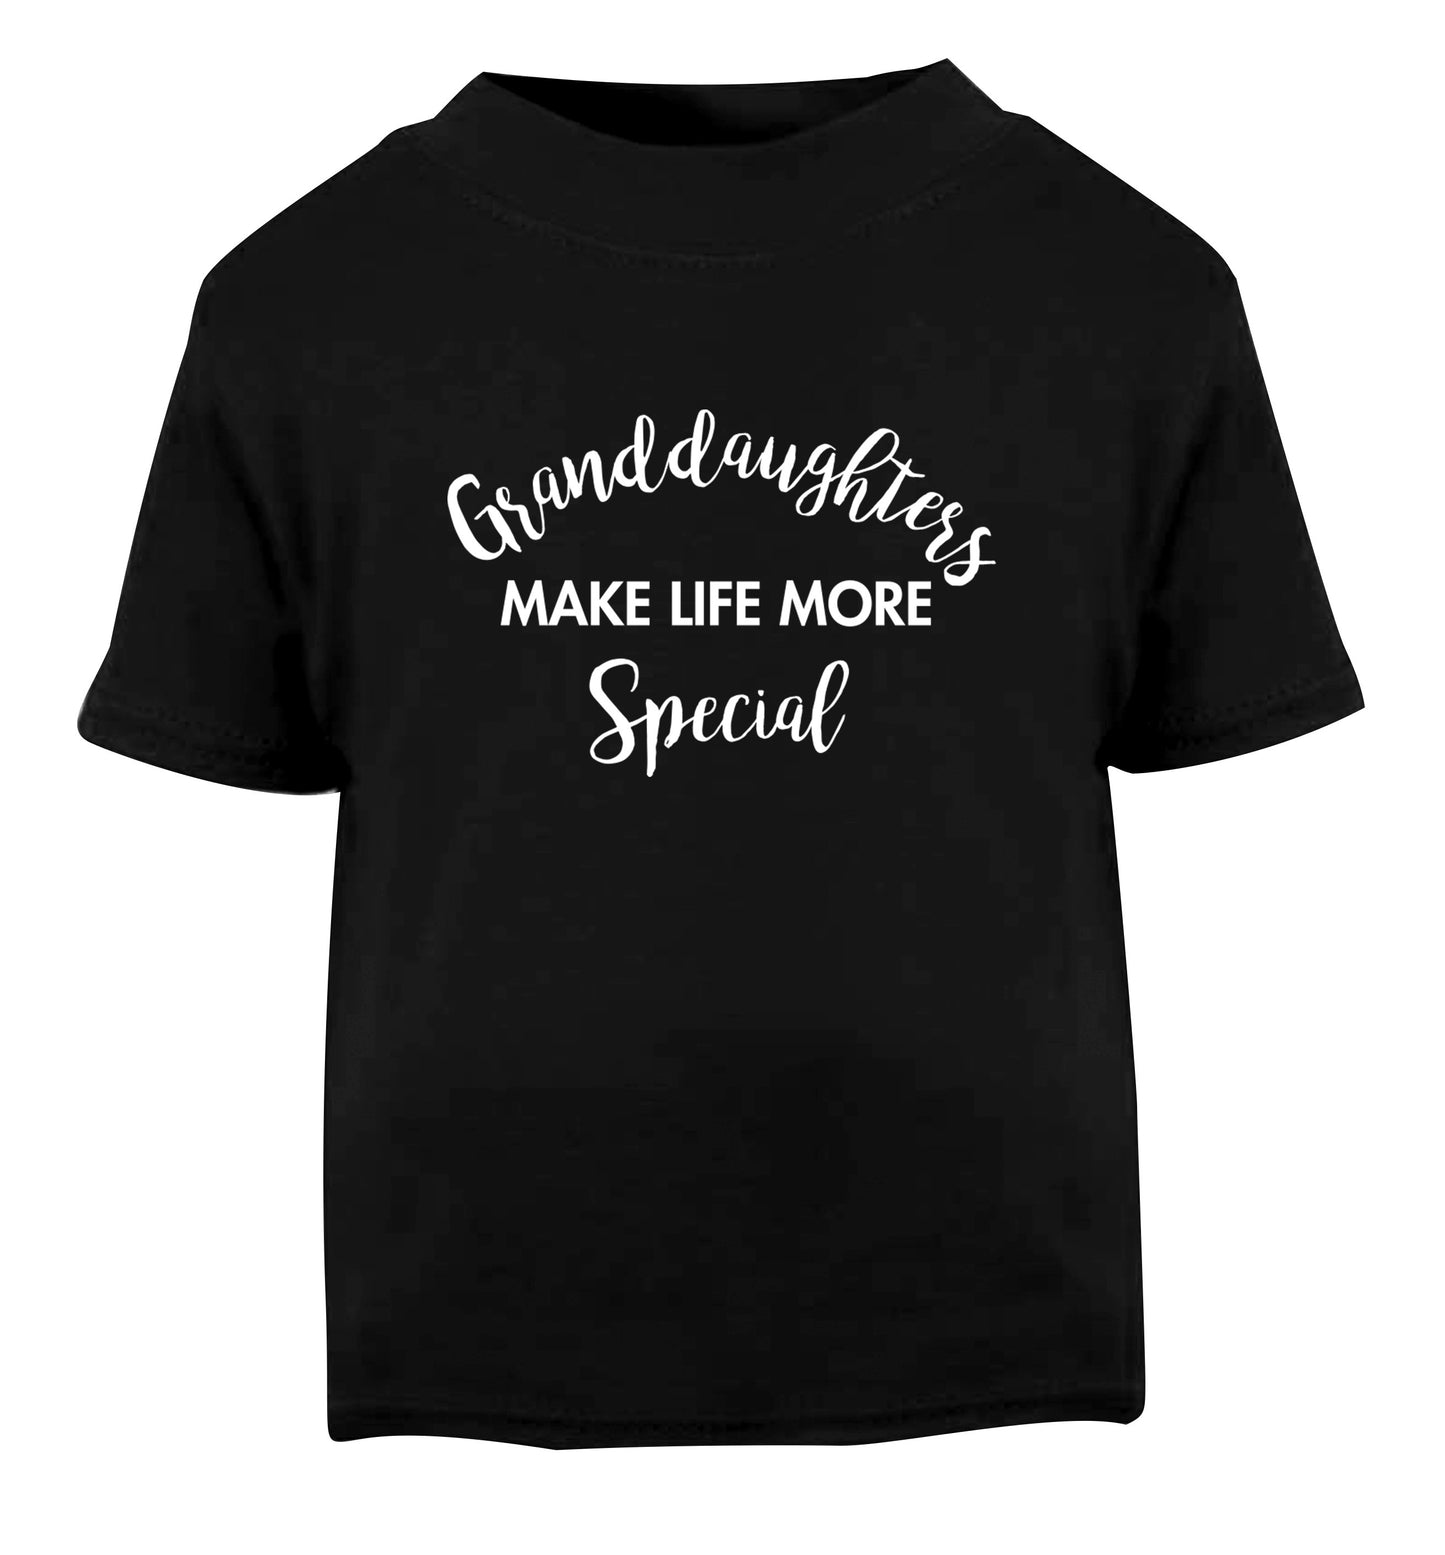 Granddaughters make life more special Black Baby Toddler Tshirt 2 years